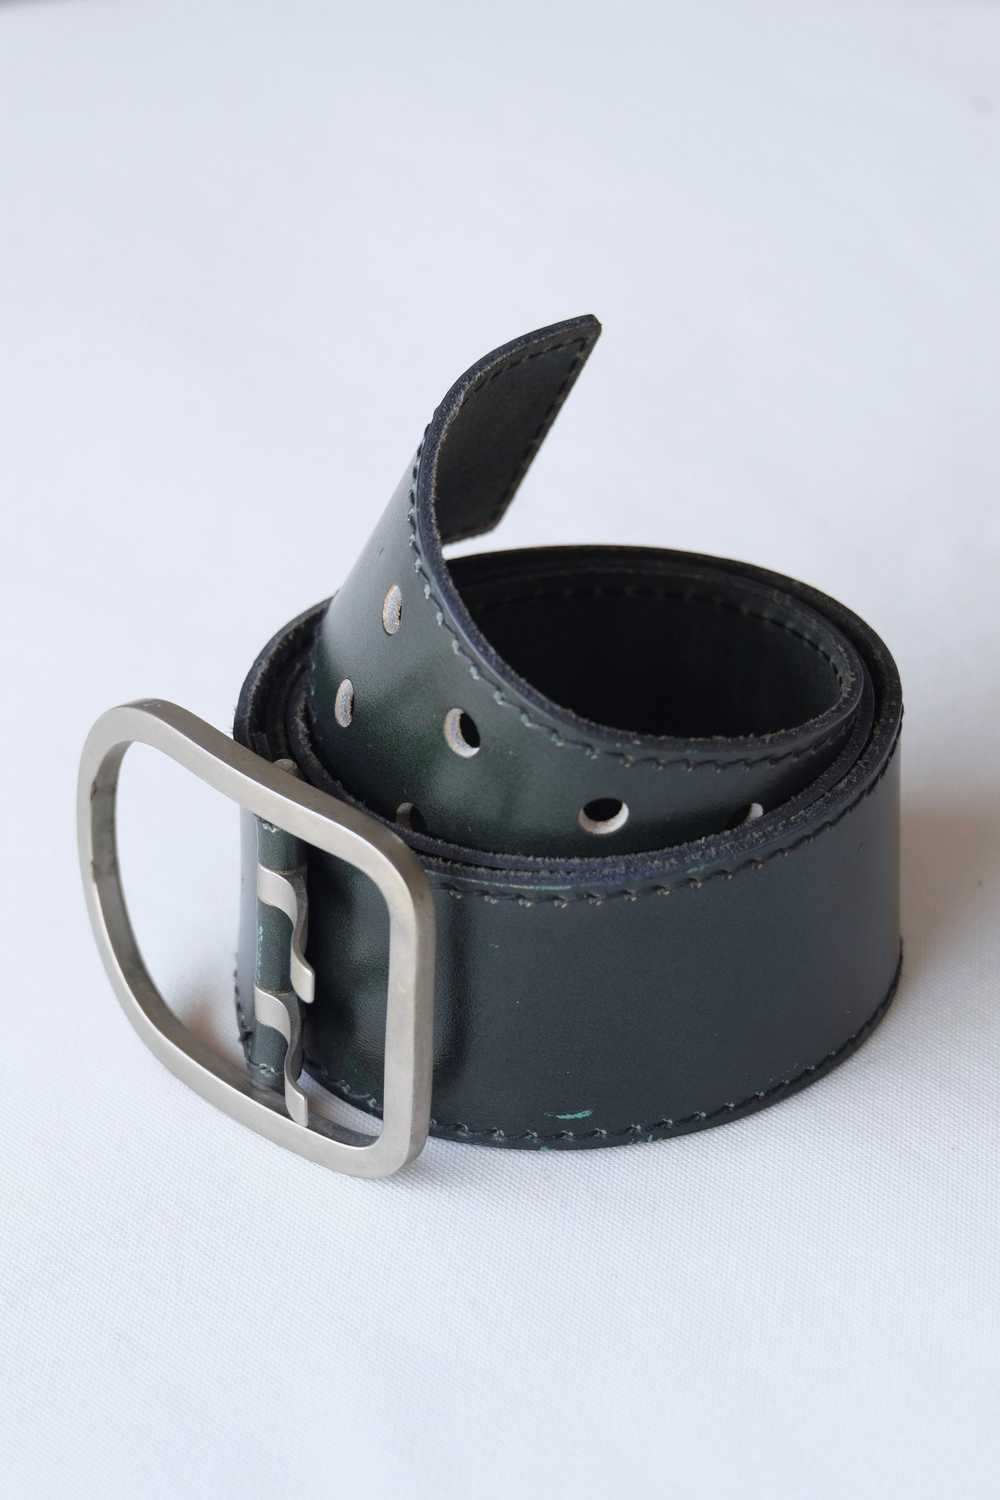 L'AIGLON Double Prong Rounded Buckle Leather Belt - image 3